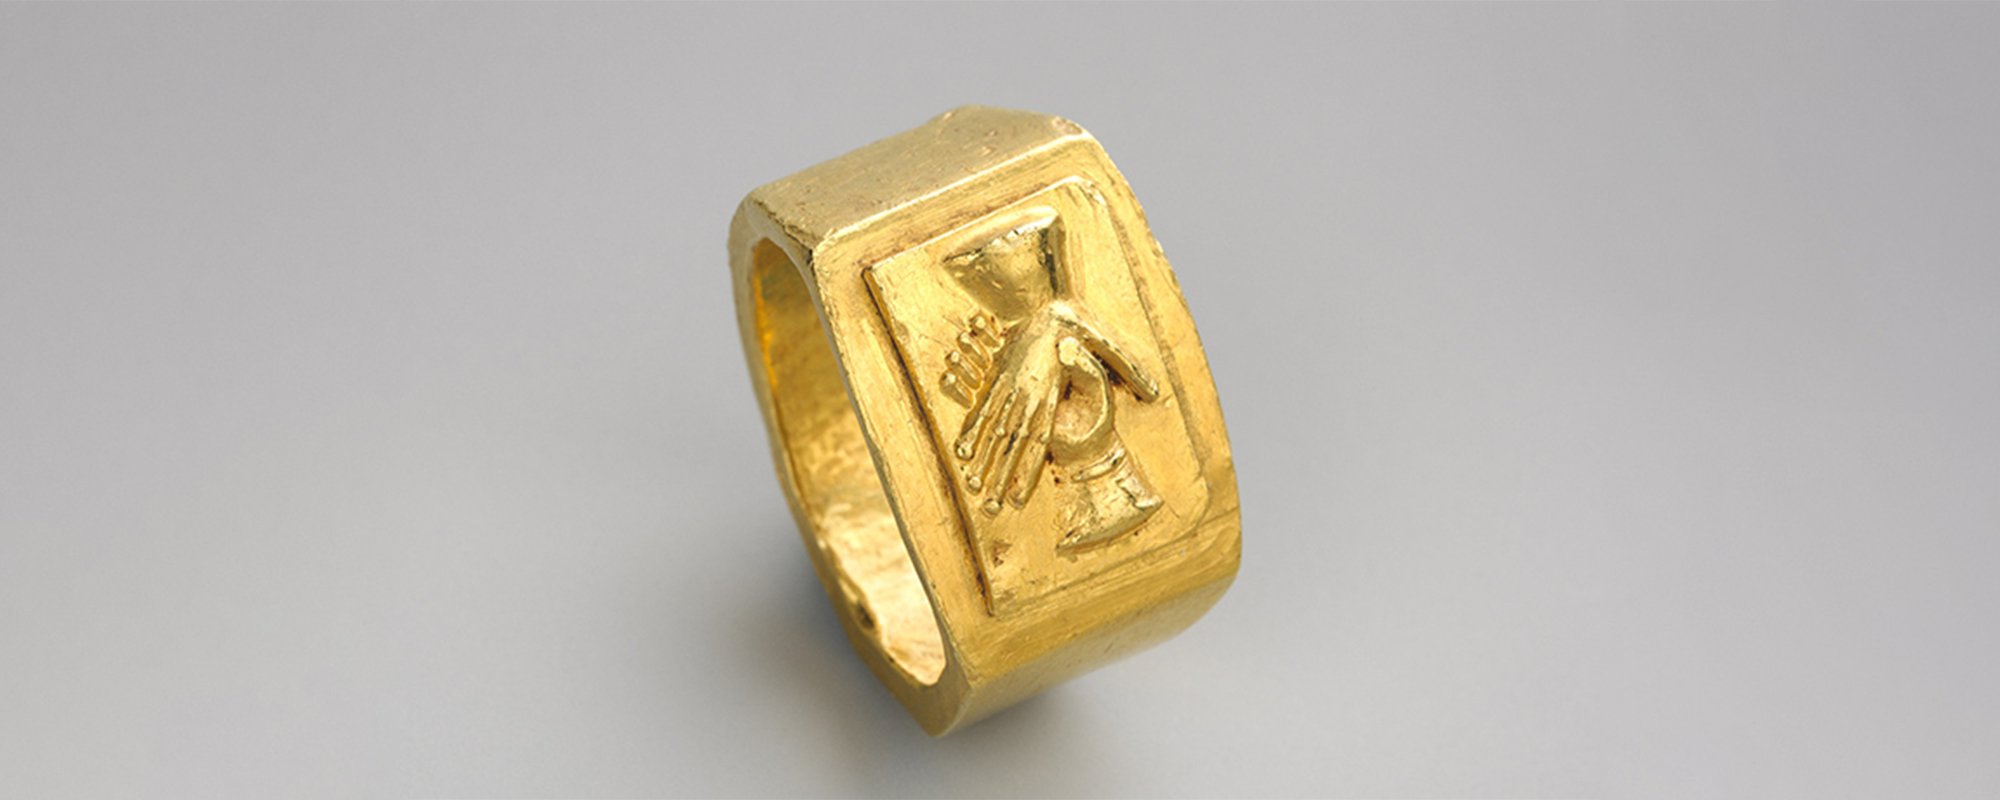 BBC - A History of the World - Object : Gold ring found by a circus  strong-man